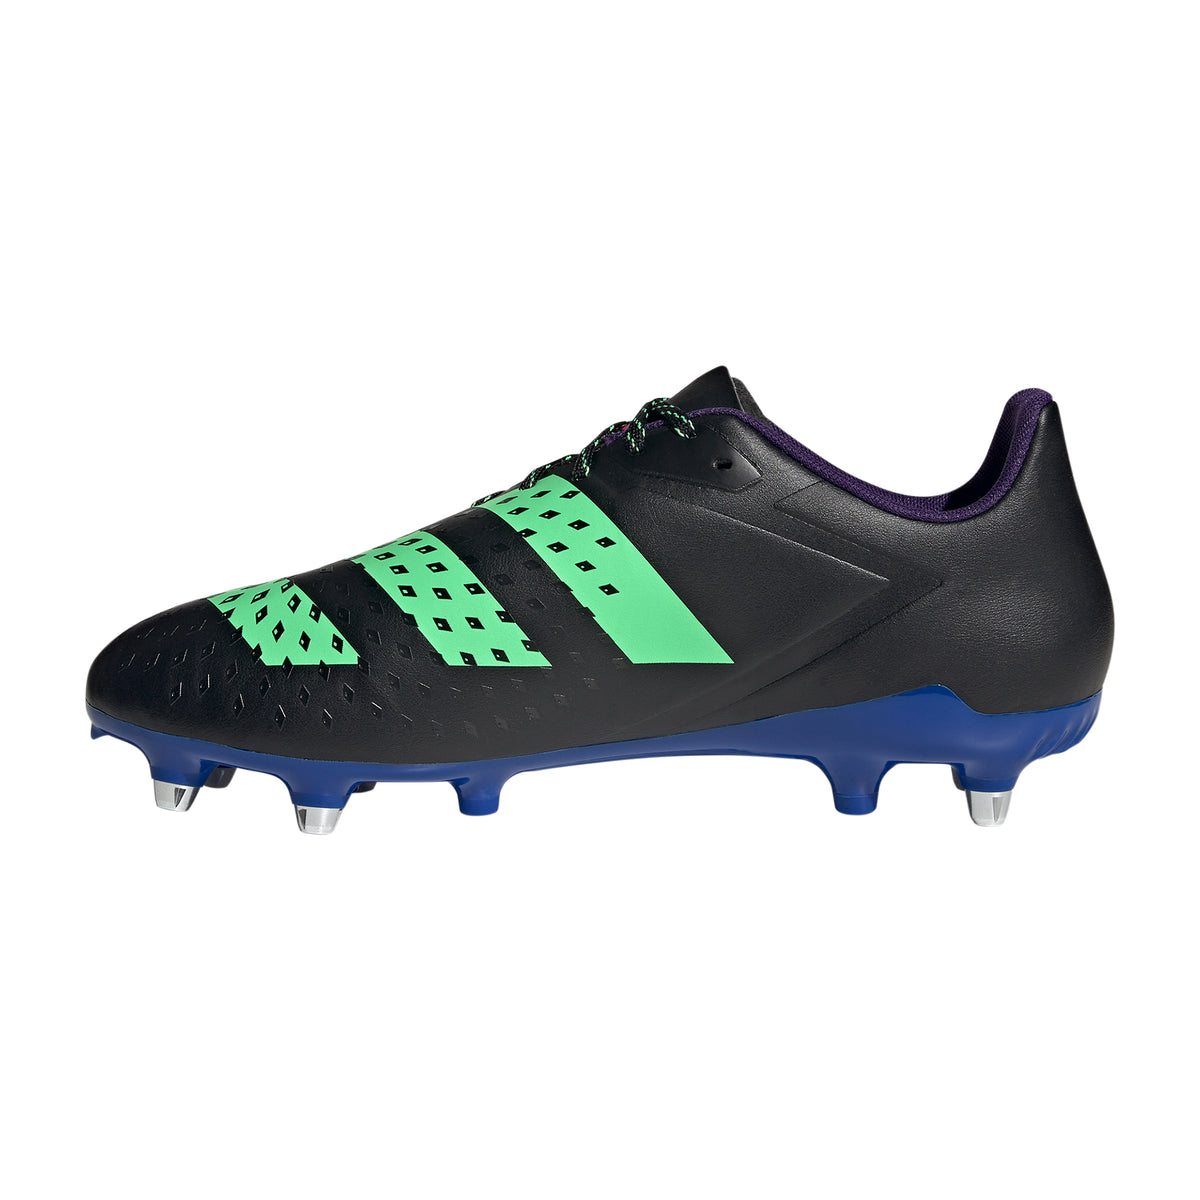 Adidas Malice SG Rugby Boots 2022: Black